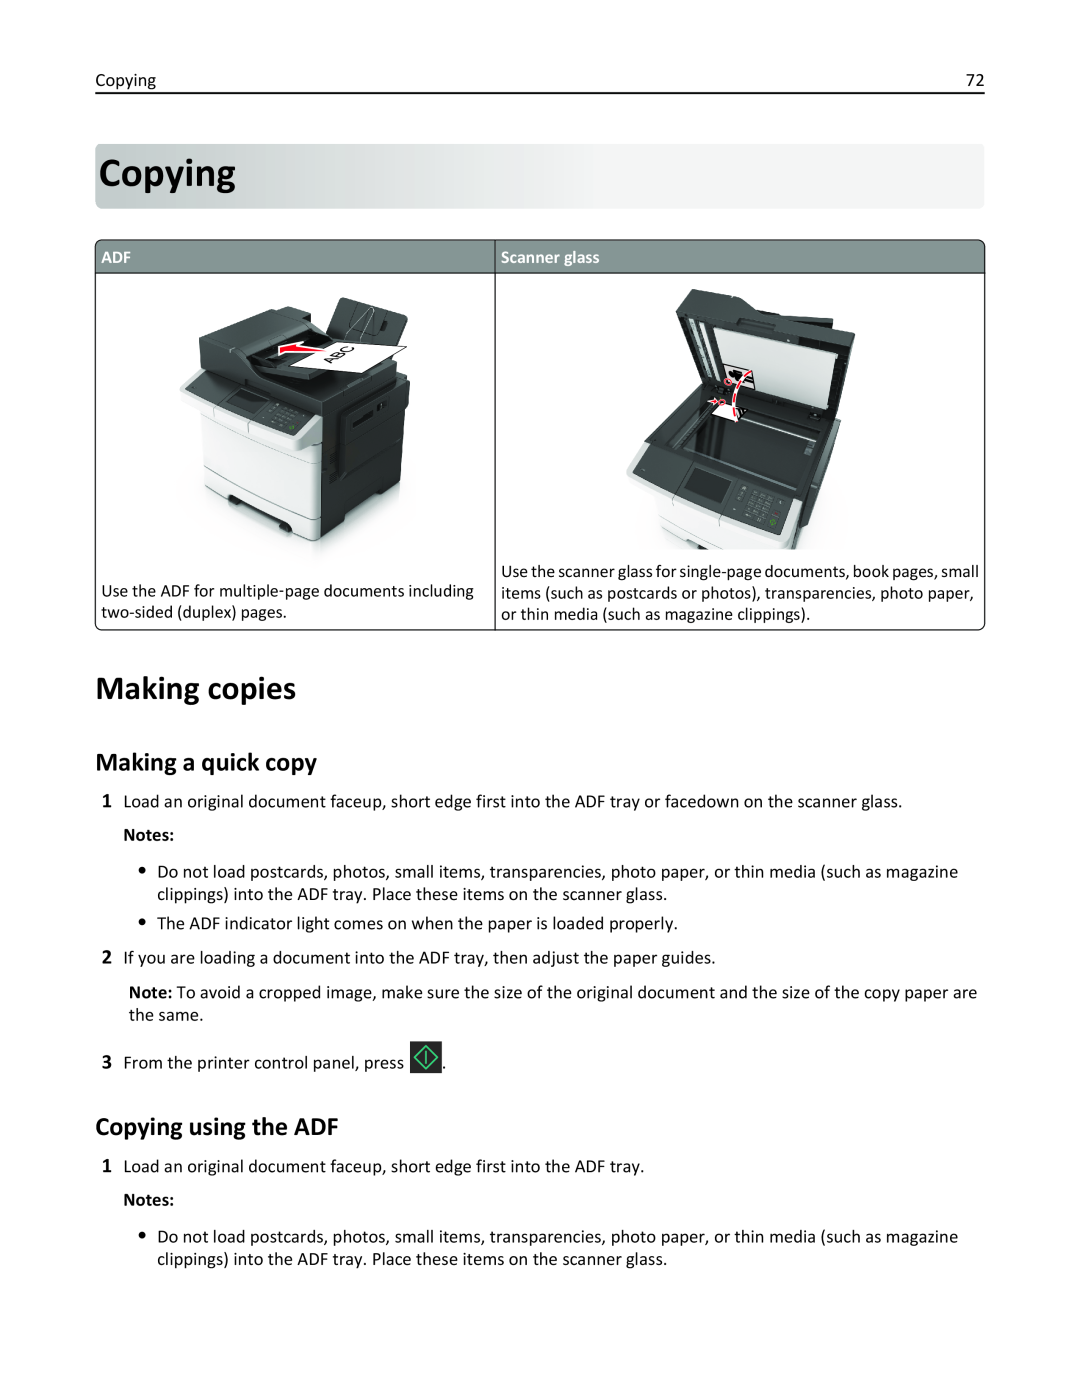 Lexmark 436 manual Making copies, Making a quick copy, Copying using the ADF 